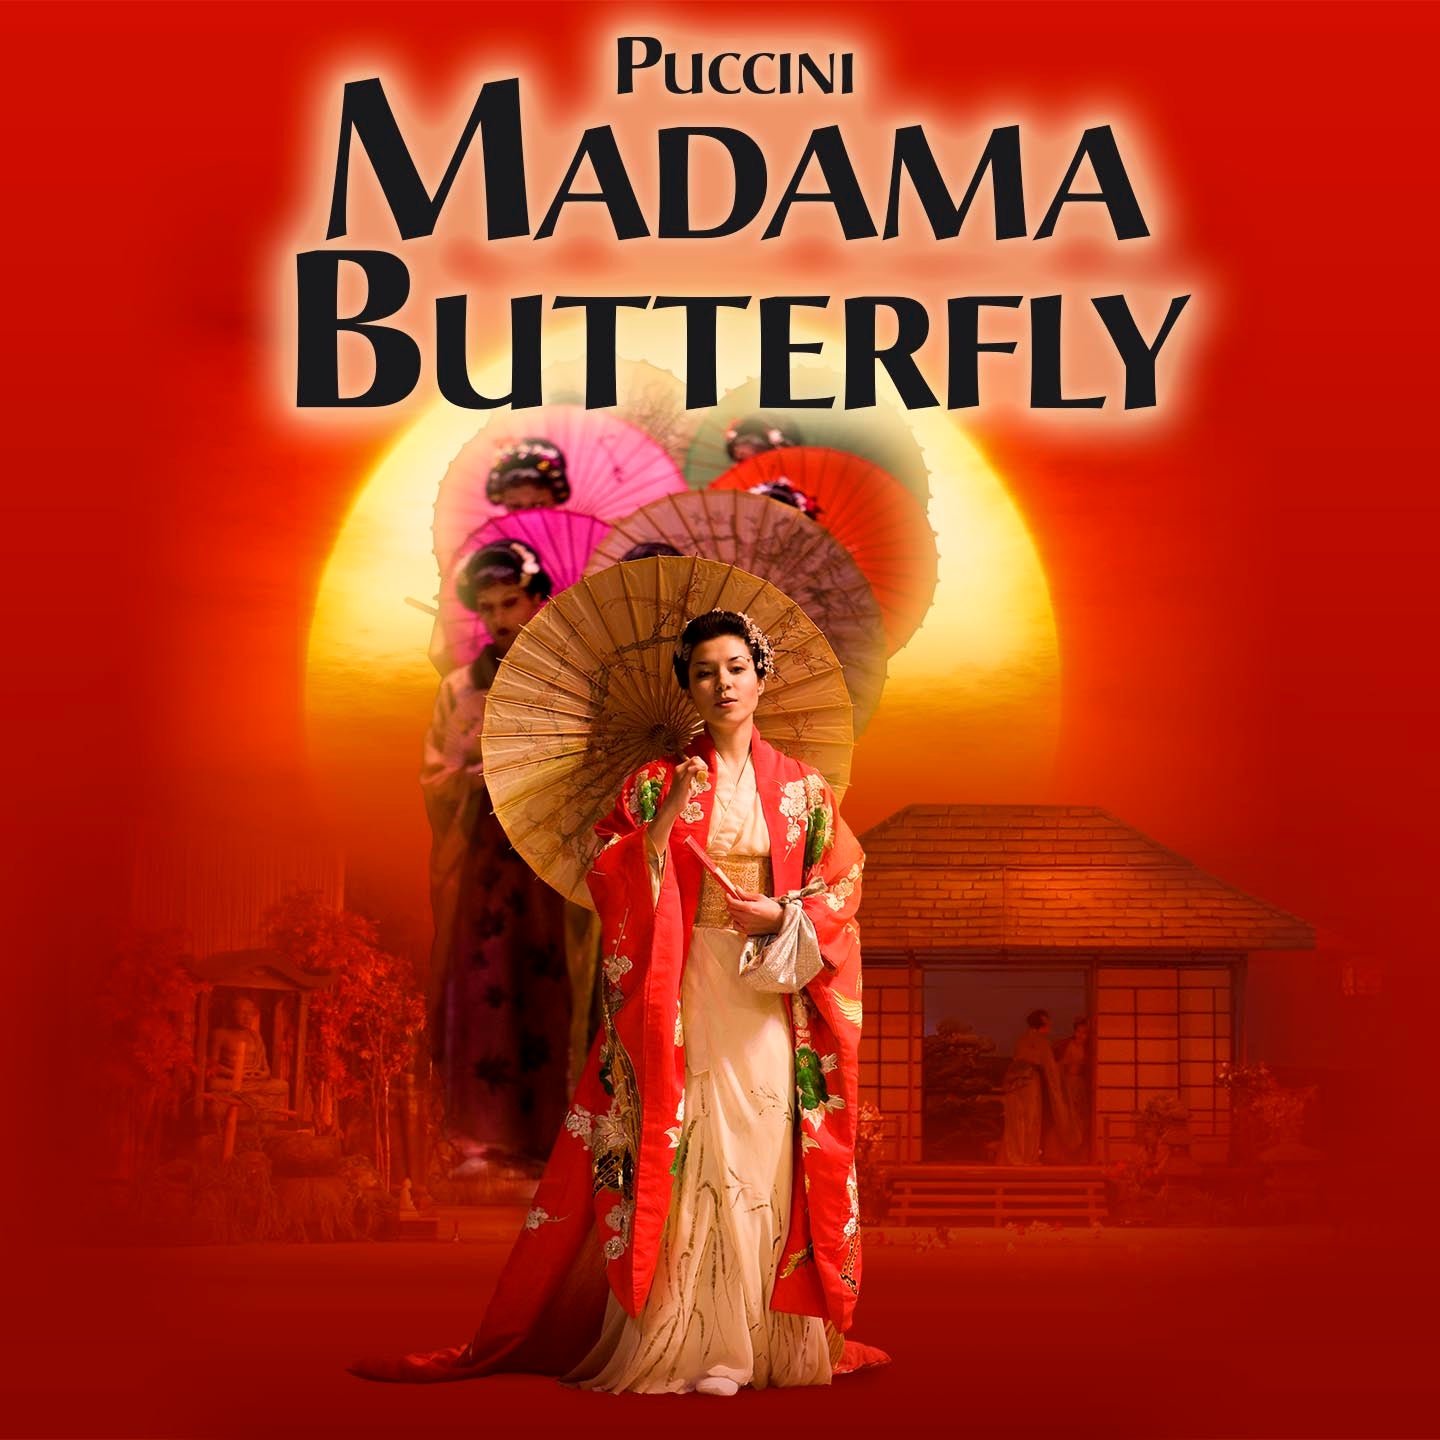 Image name Ellen Kents Madama Butterfly at Hull City Hall Hull the 2 image from the post Ellen Kent's - MADAMA BUTTERFLY at Sheffield City Hall Oval Hall, Sheffield in Yorkshire.com.